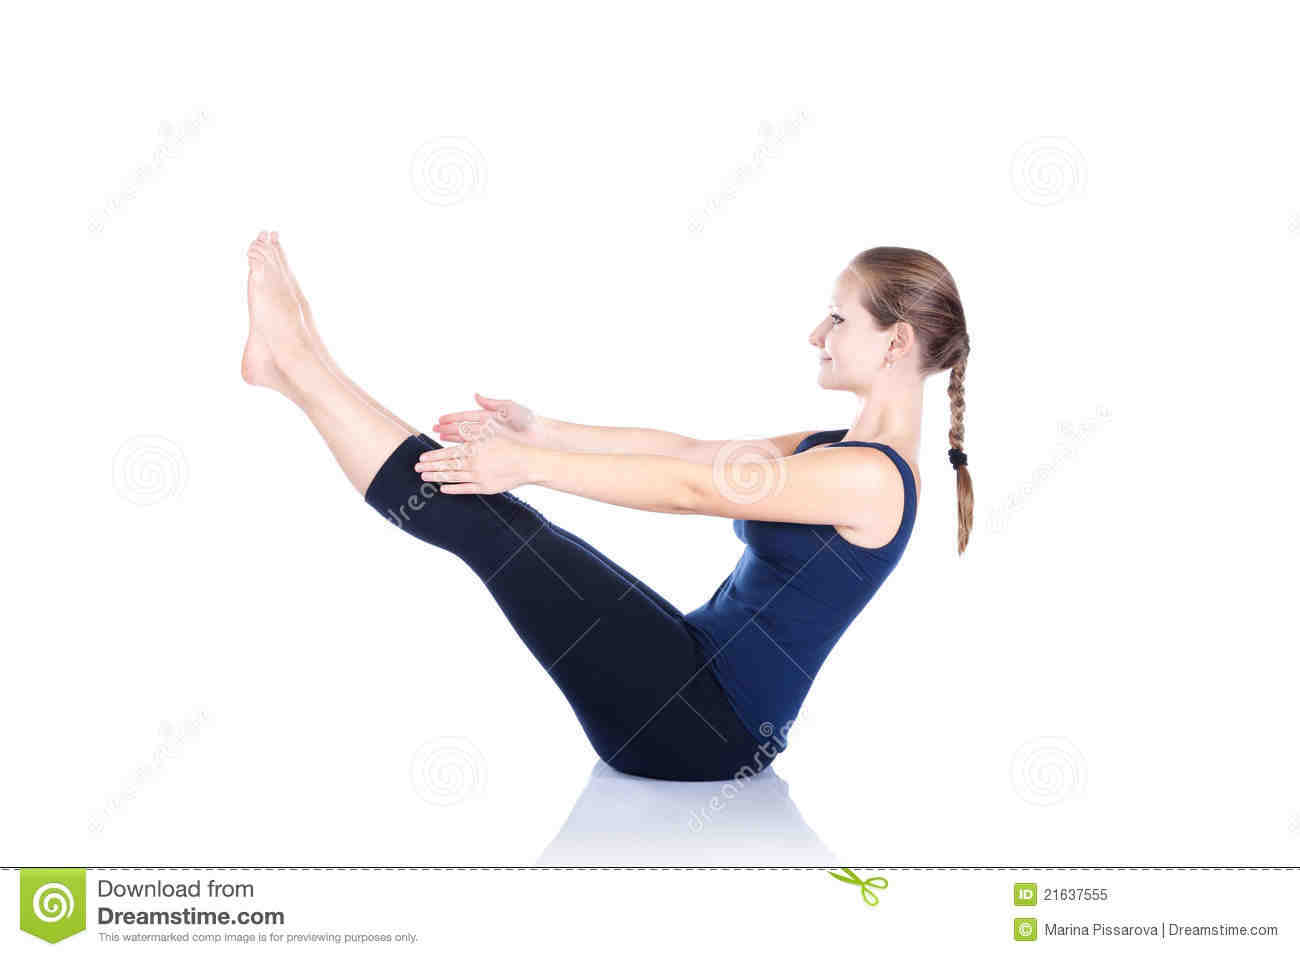 Why is triangle pose so hard?